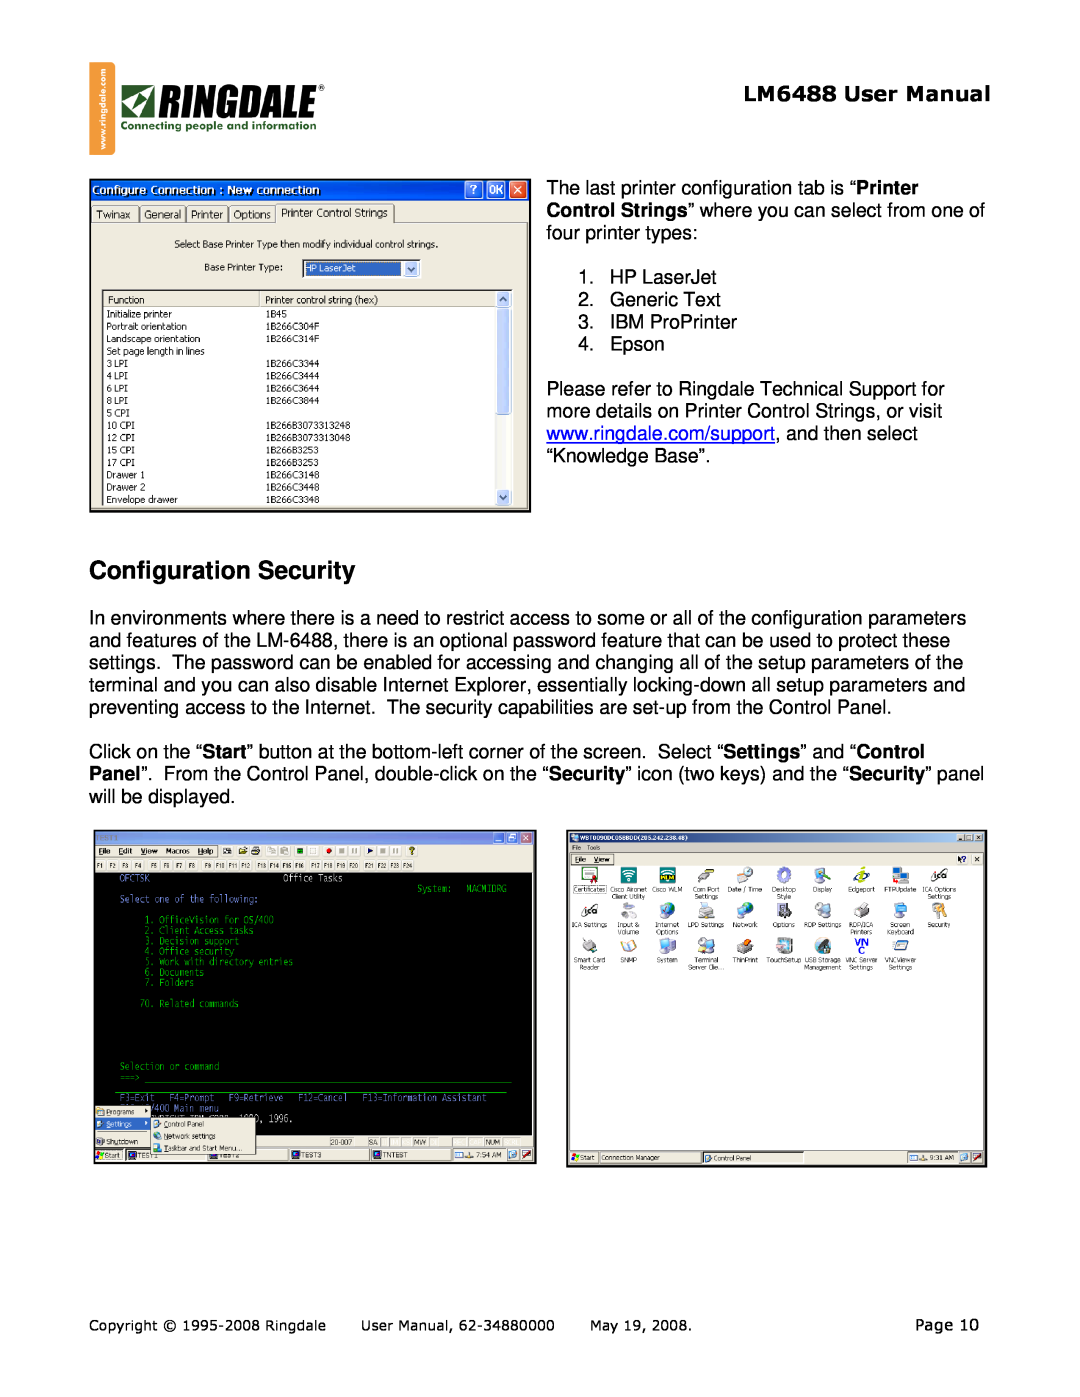 Ringdale LM-6488 user manual Configuration Security 